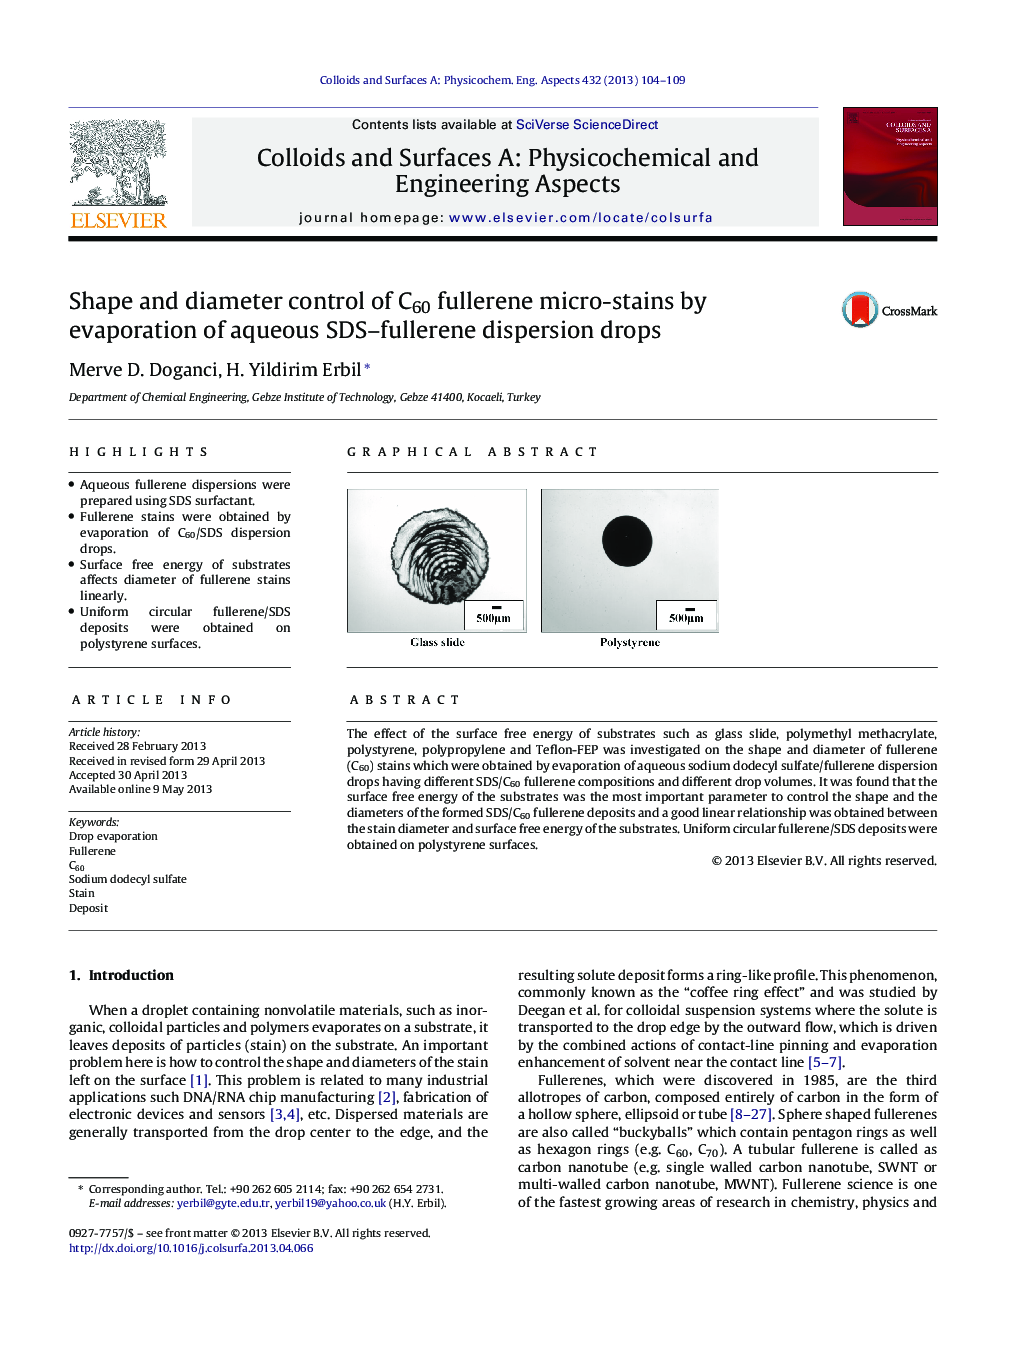 Shape and diameter control of C60 fullerene micro-stains by evaporation of aqueous SDS-fullerene dispersion drops